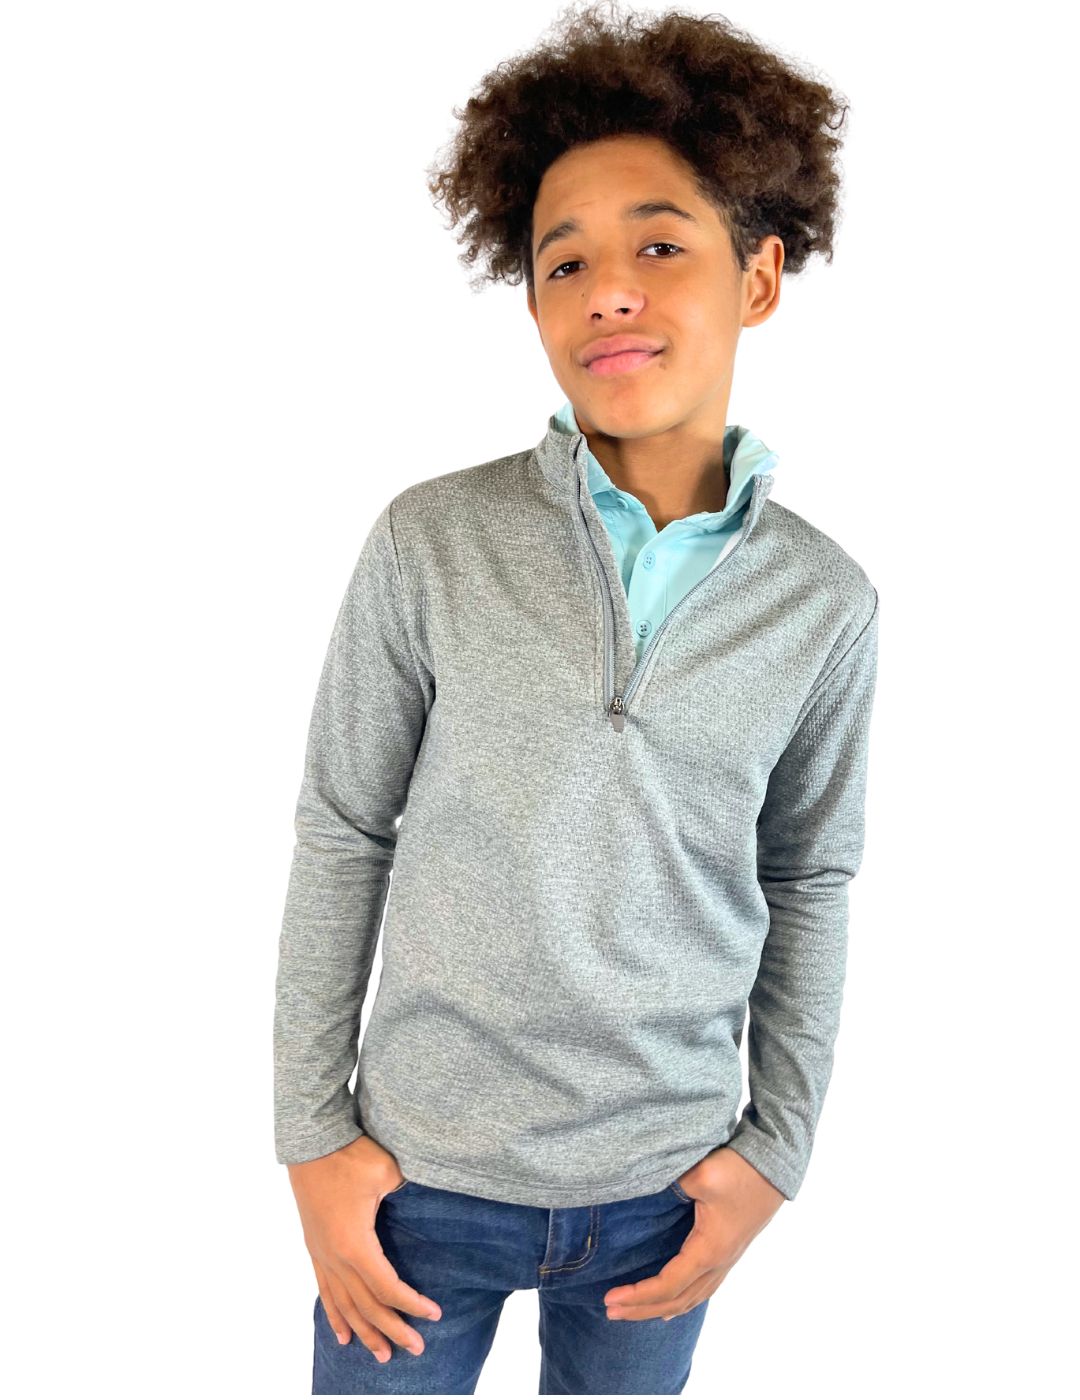 Chase Youth Boys' Quarter-zip Pullover